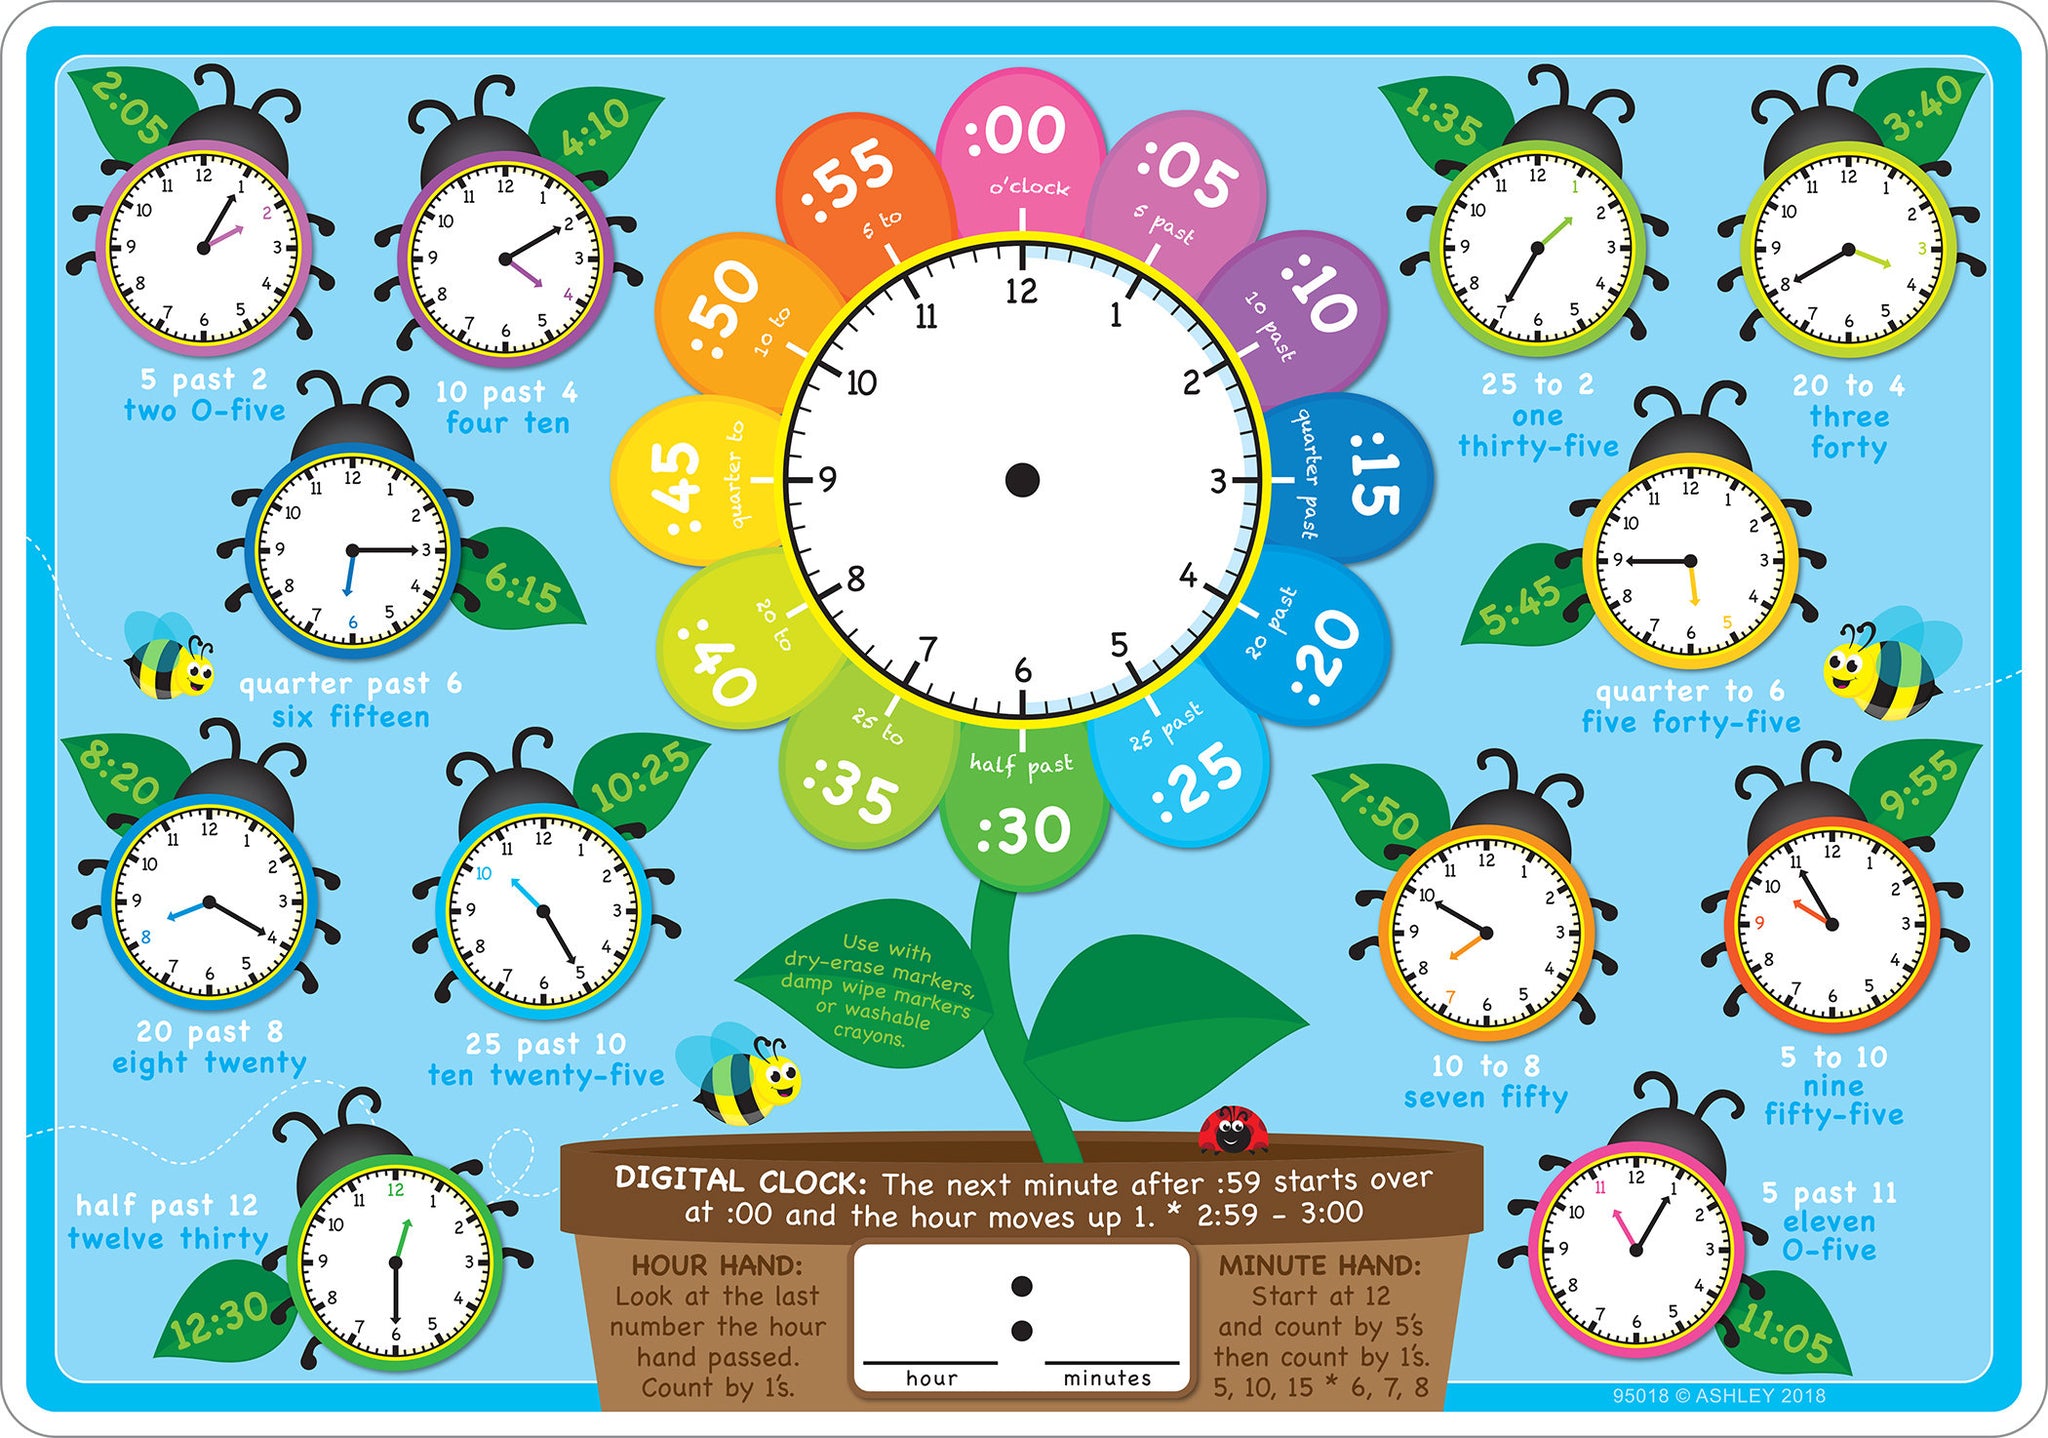 Ashley Smart Poly Telling Time Learning Mat 2-Sided, 12" X 17" (ASH95018)